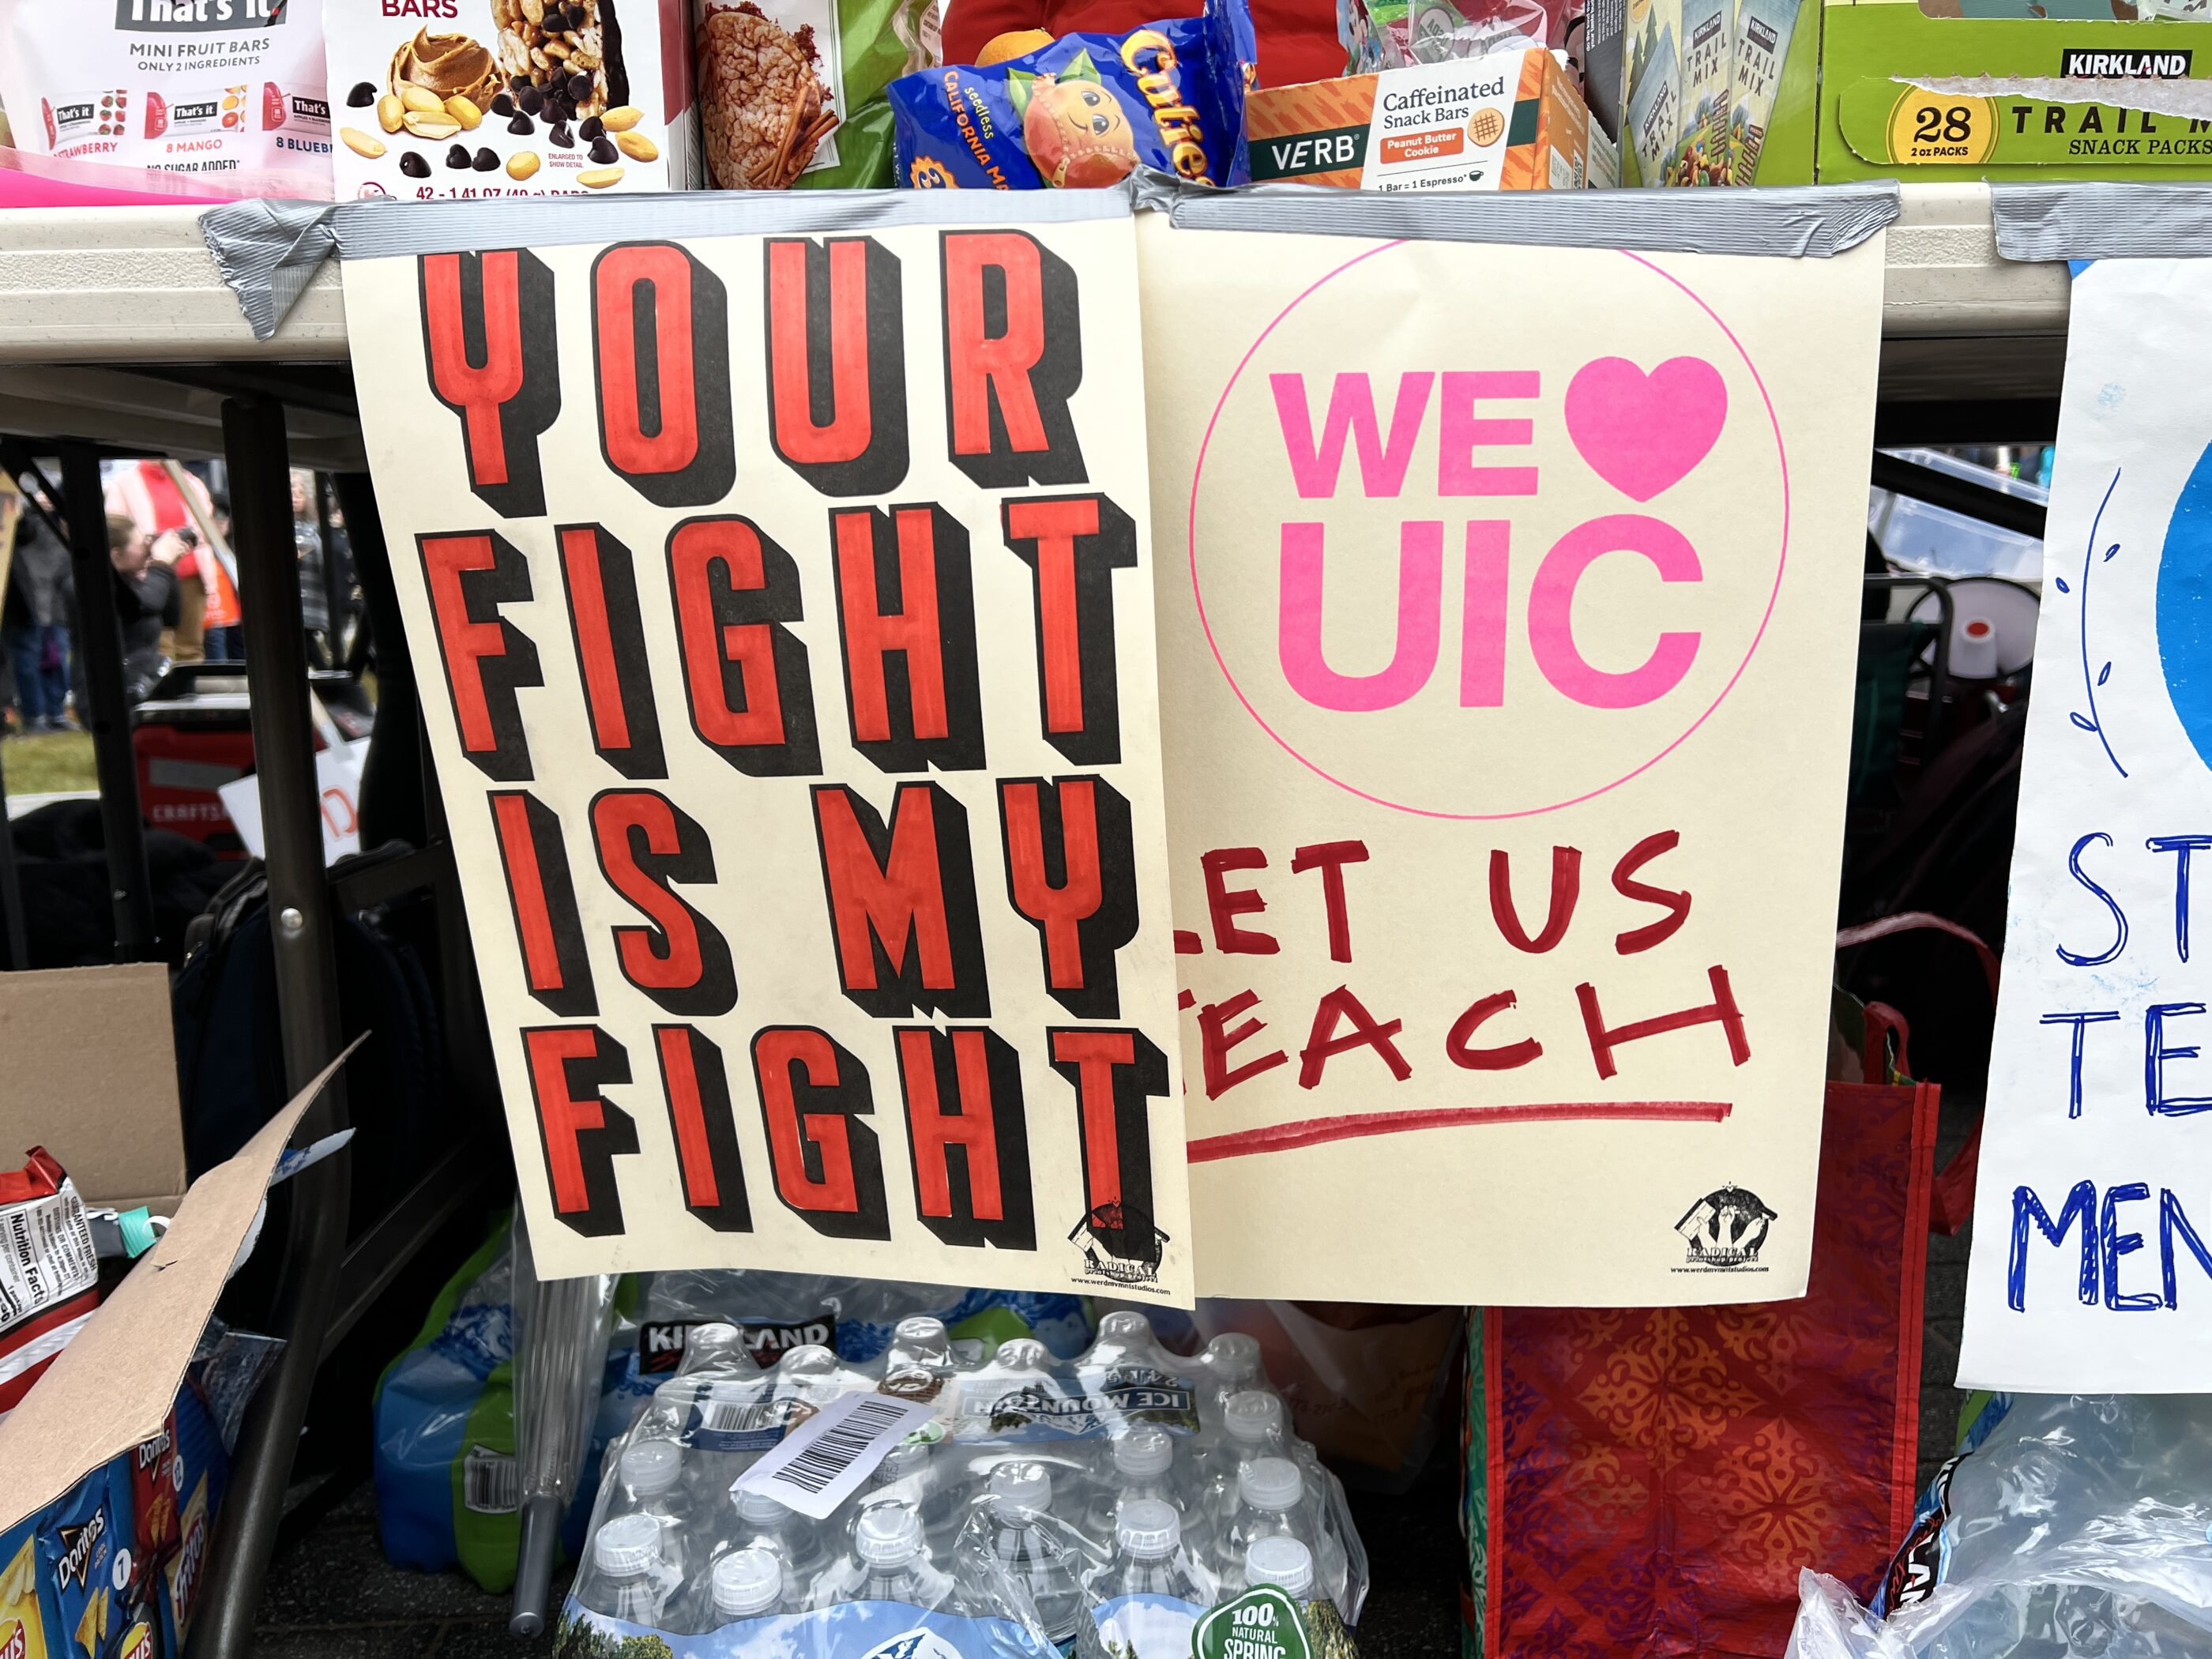 Image of Posters hanging from a table. The poster on the right reads Your Fight Is My Fight and the poster on the left reads We Heart UIC Let Us Teach, with teach underlined.